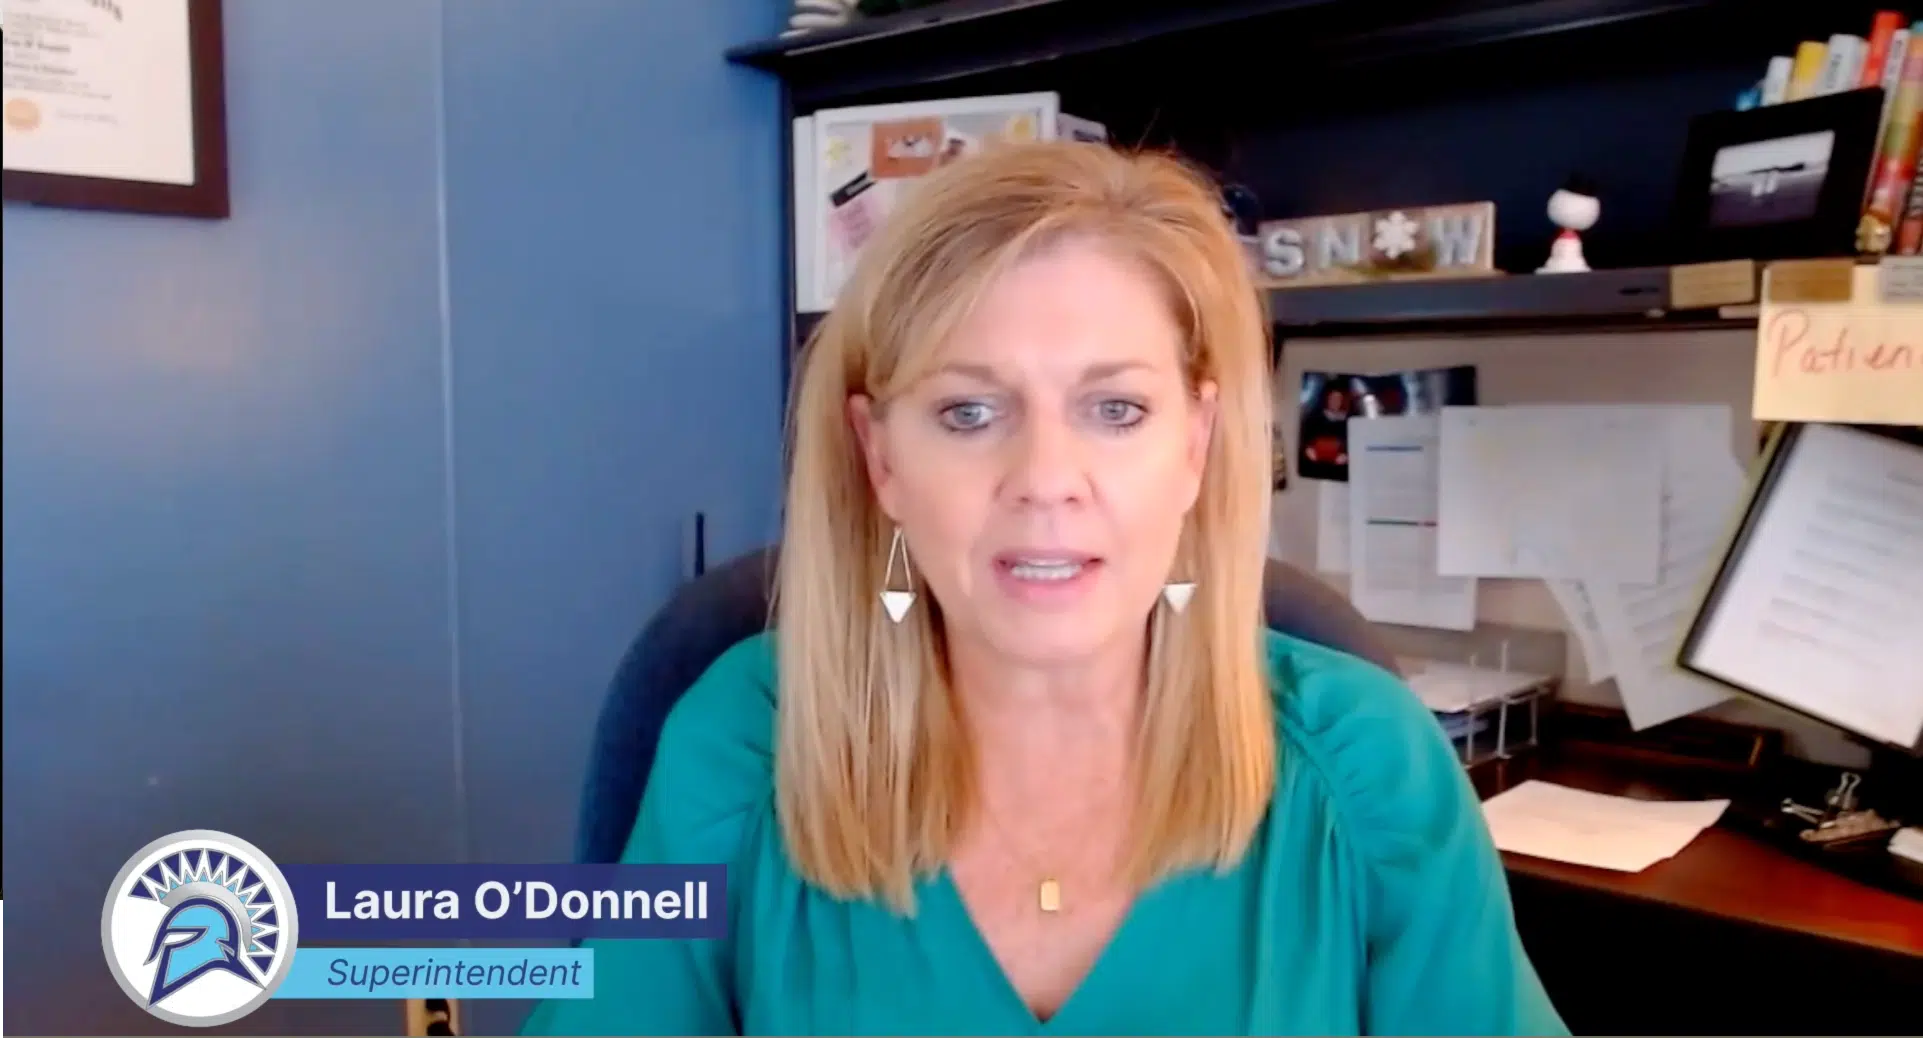 Screenshot from video. Laura O'Donnell, Superintendent on screen with name overlayed in lower left corner